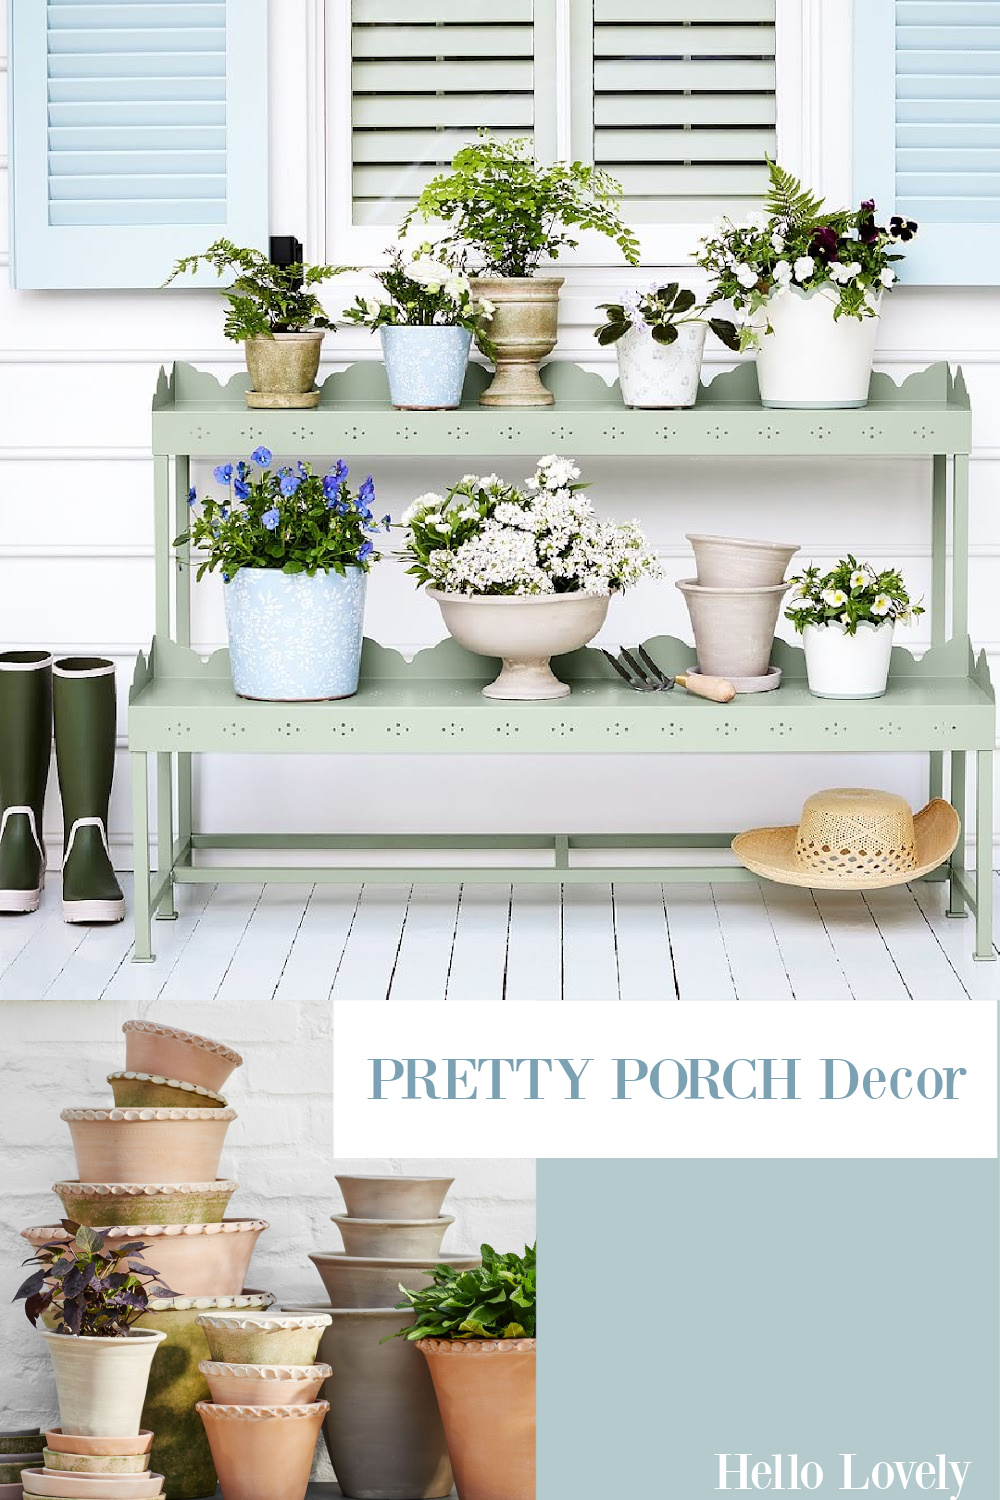 Pretty porch decor from Pottery Barn with sage green plant stand and vintage style pots - Hello Lovely Studio. #porchdecor #plantstands